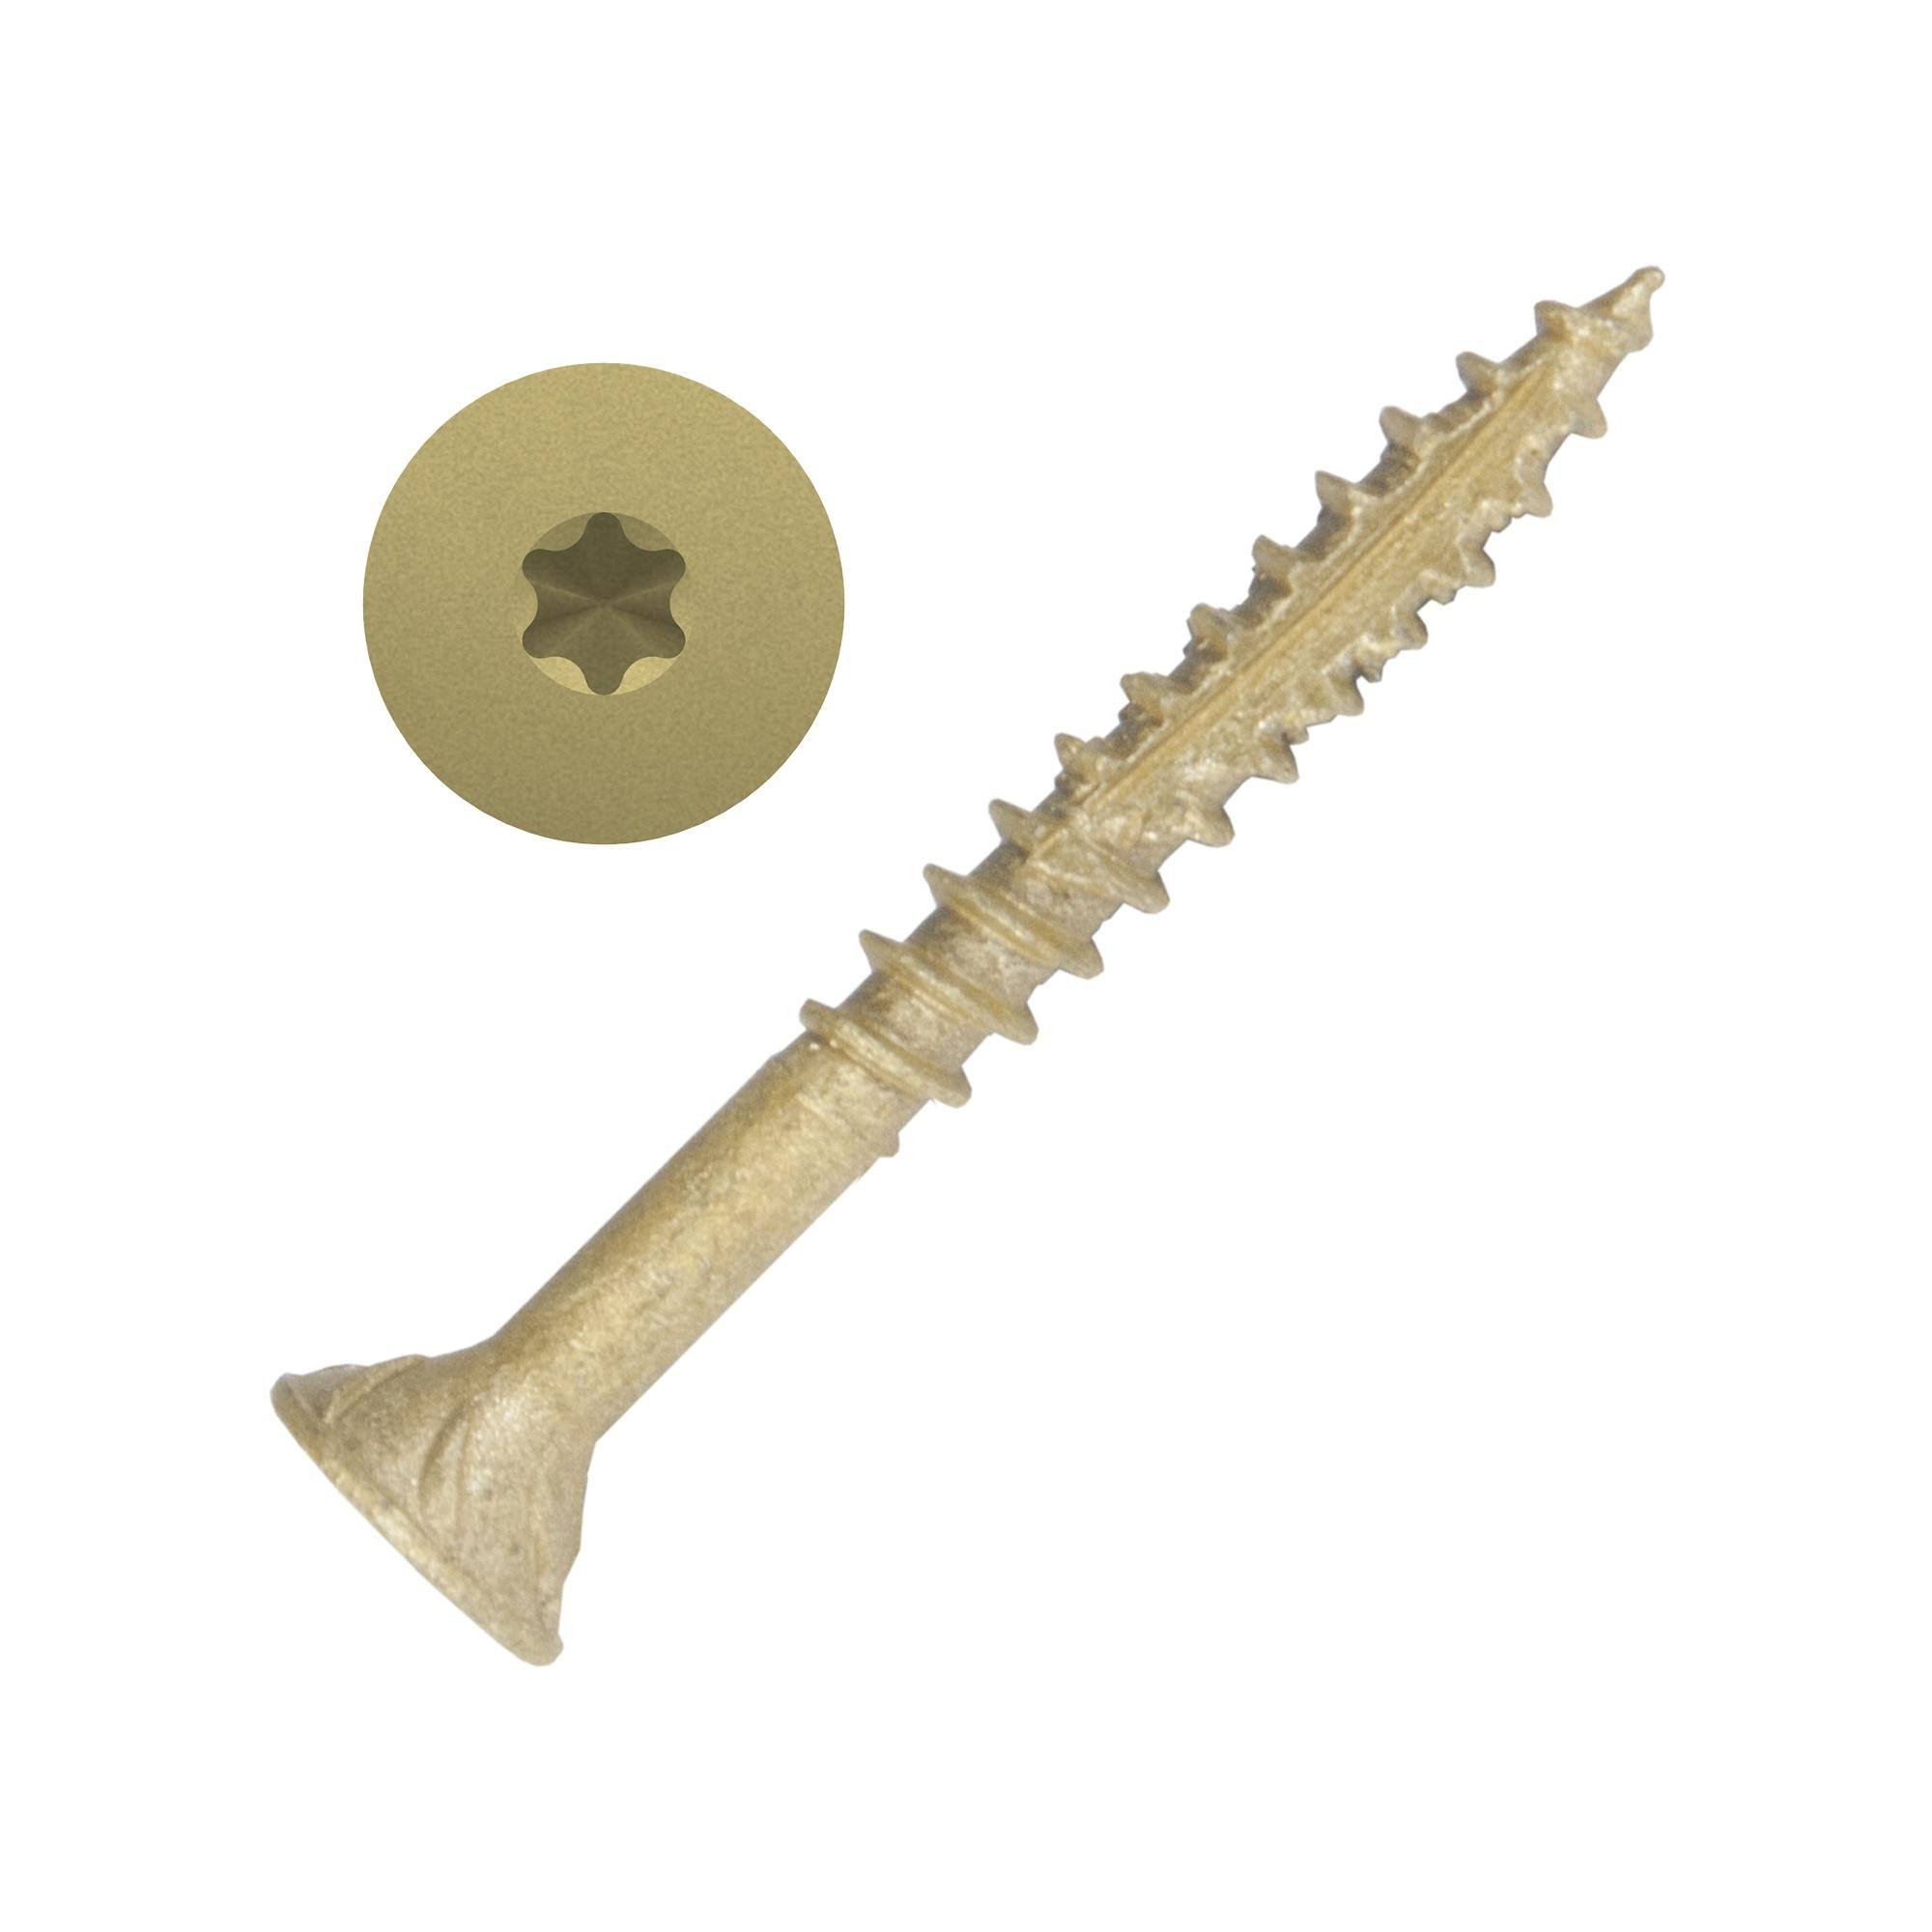 Screw Products Axis #9 Exterior STRUCTURAL Wood Screw - 5 lbs - 3"